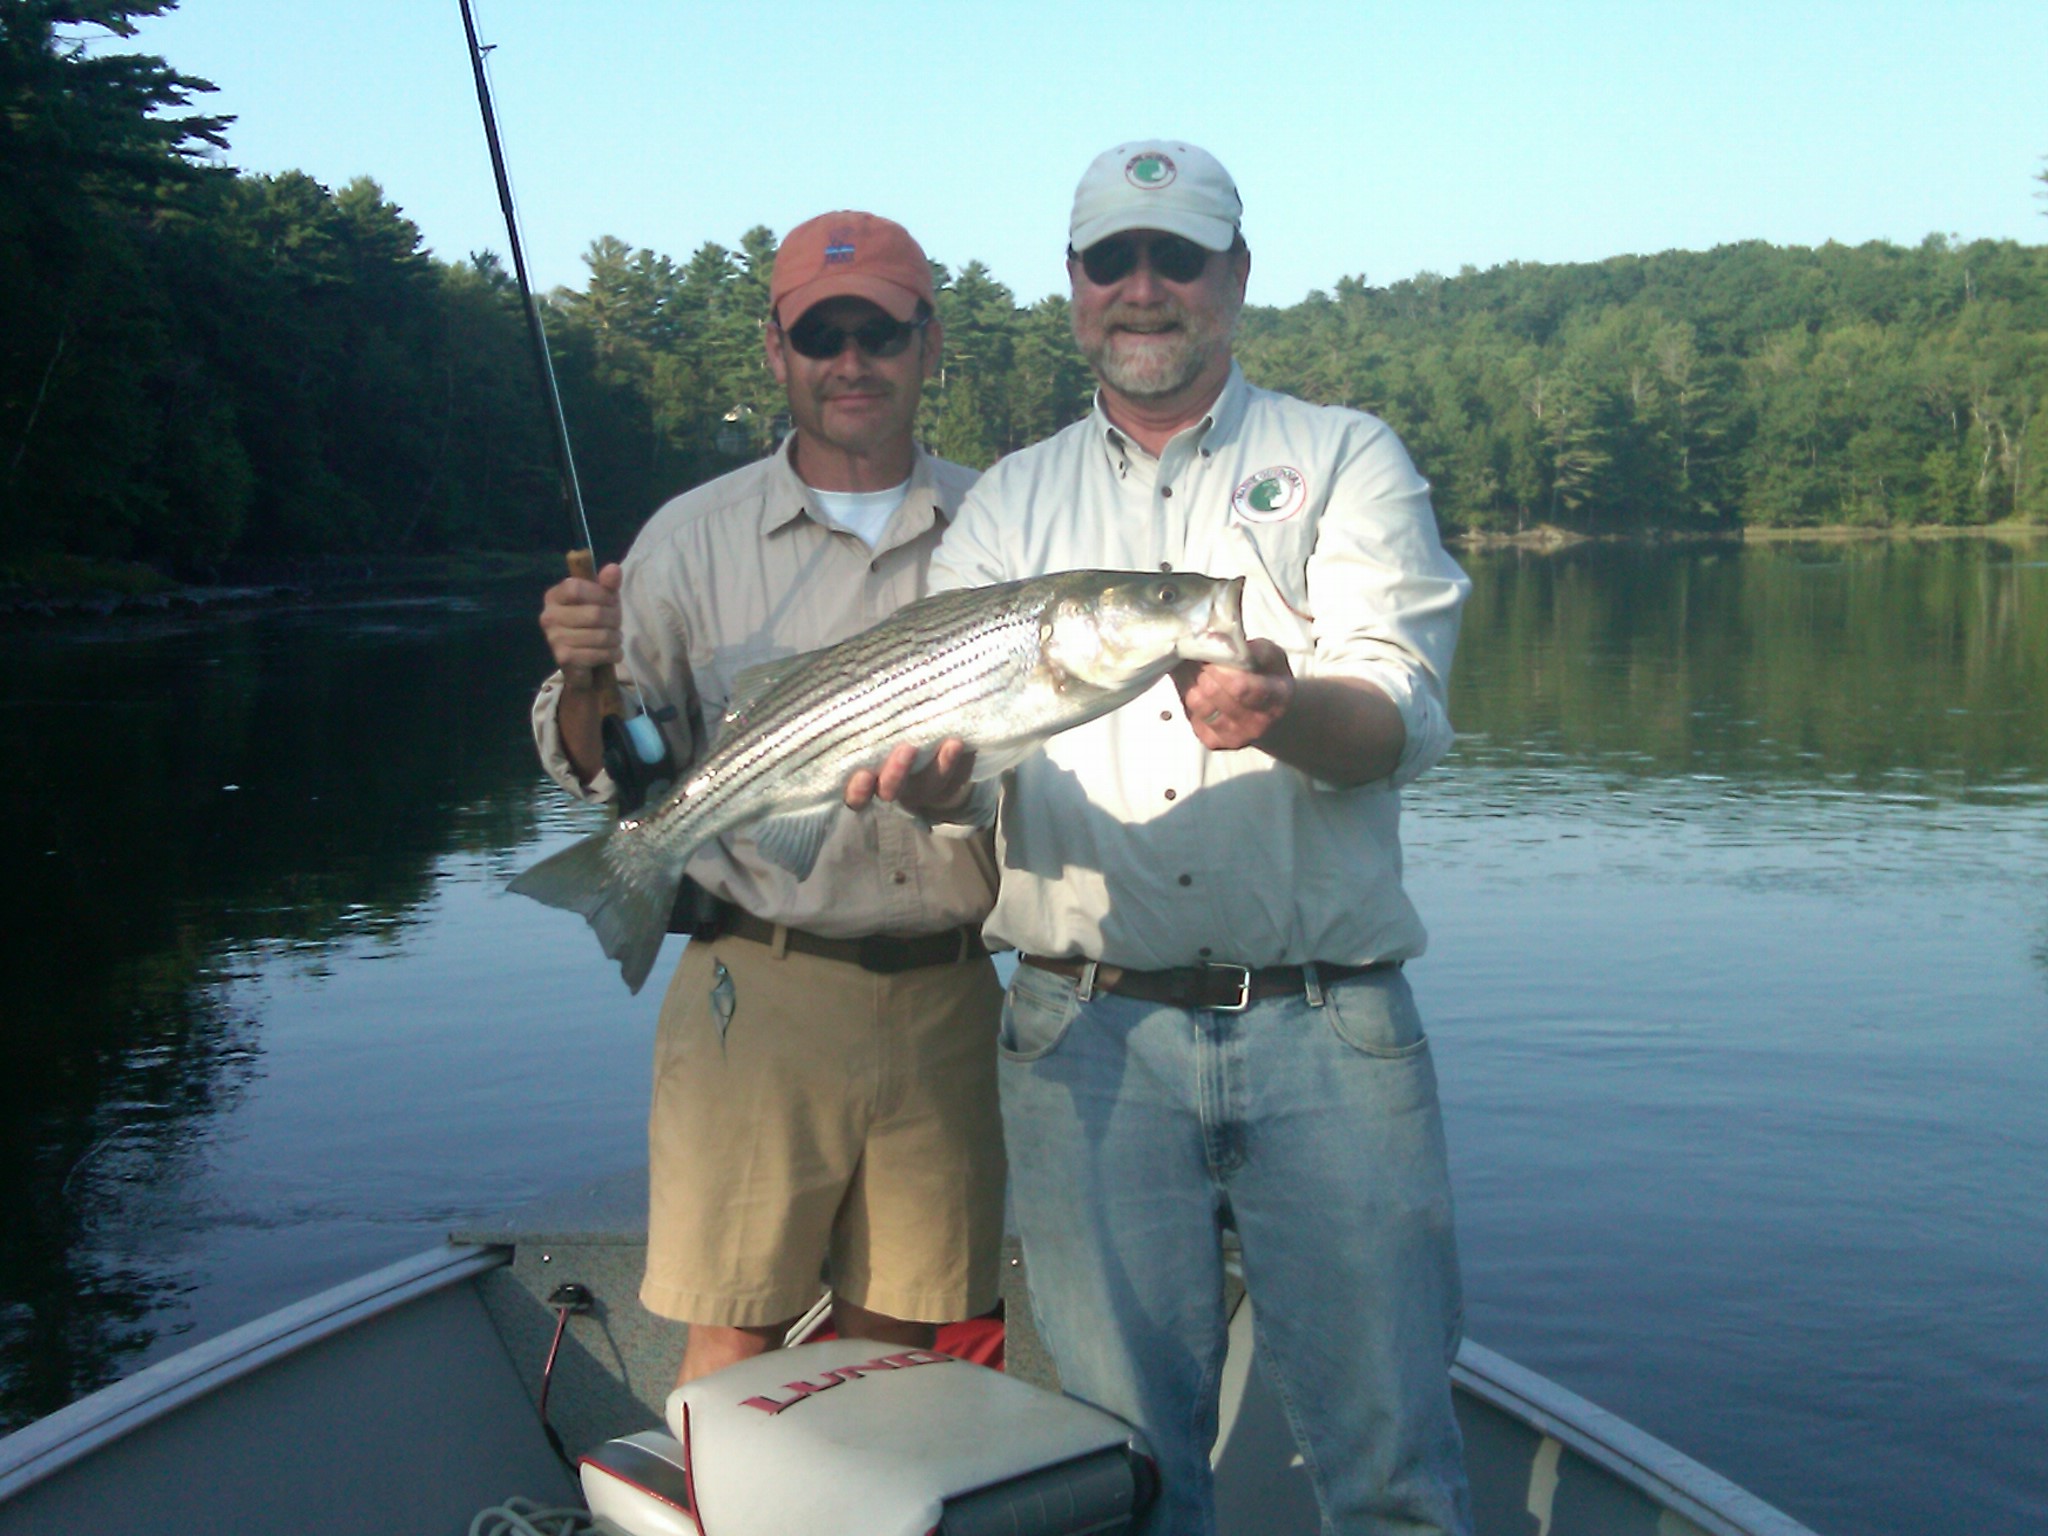 John and Don with a striper caught on a fly